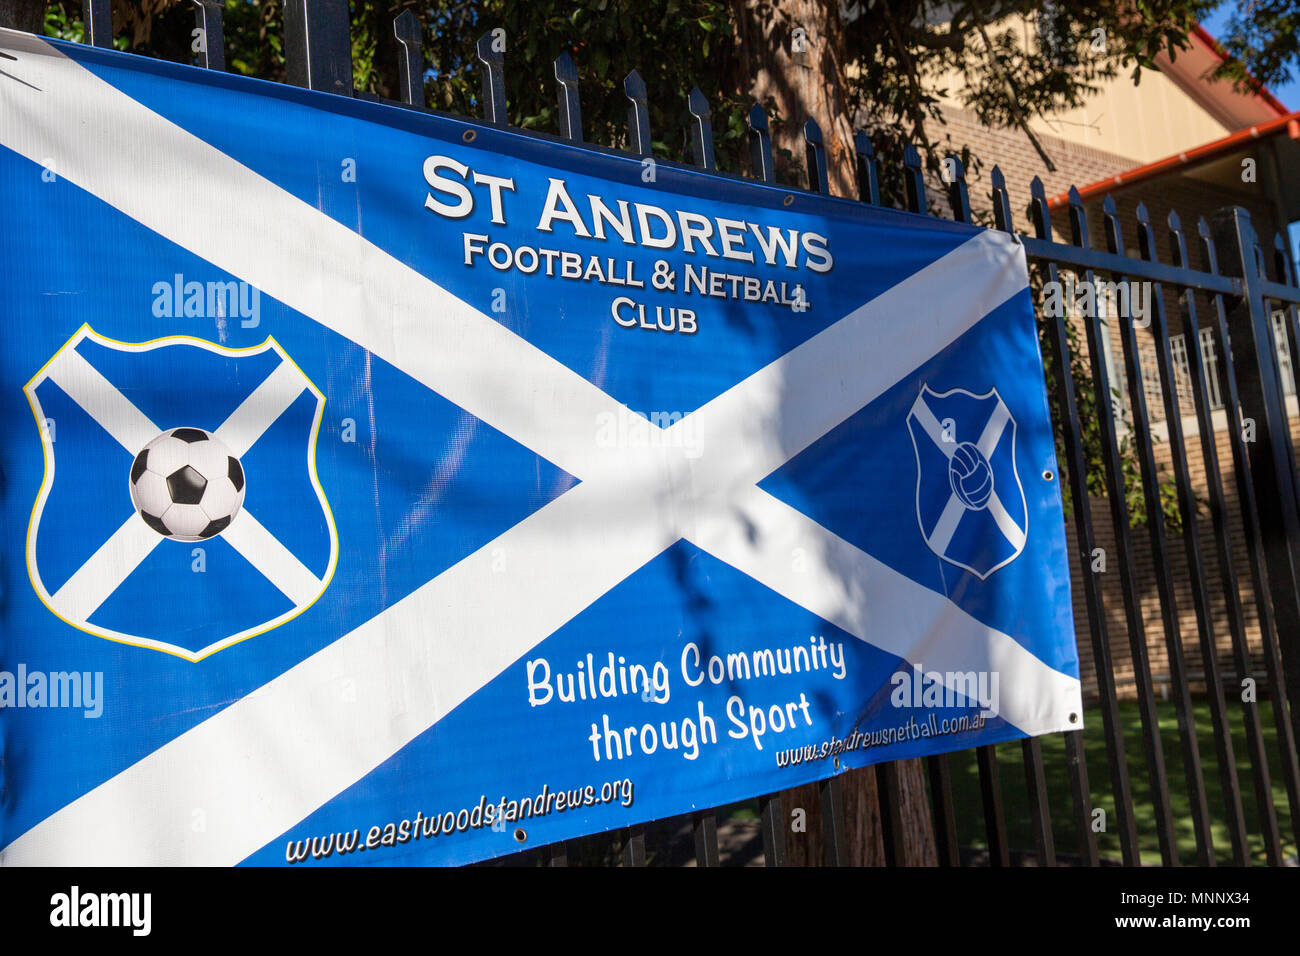 St Andrews football and netball club in Eastwood,Sydney,Australia Stock Photo